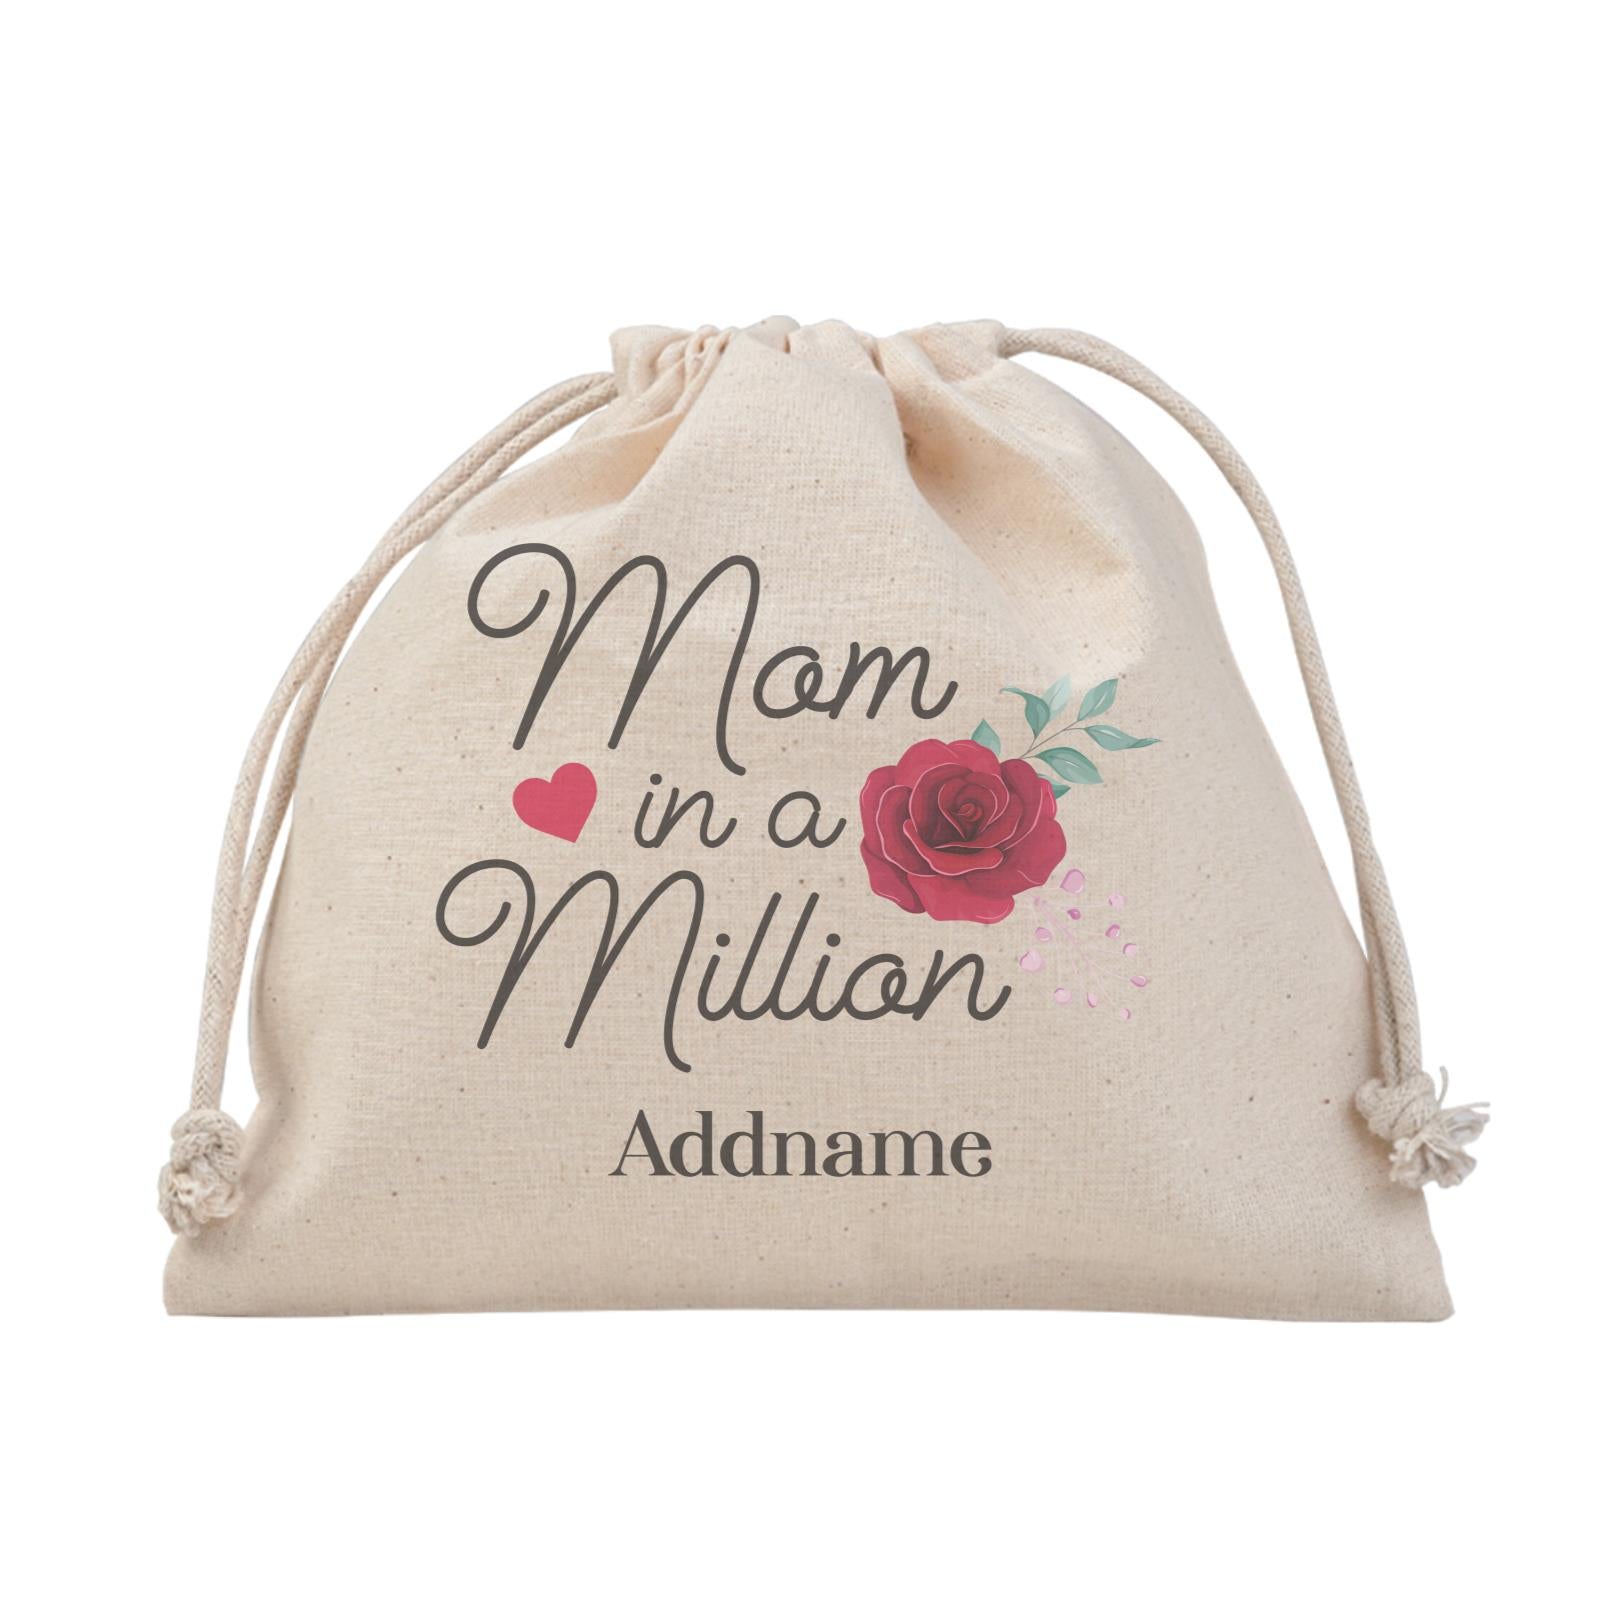 [MOTHER'S DAY 2021] Mom In A Million Satchel